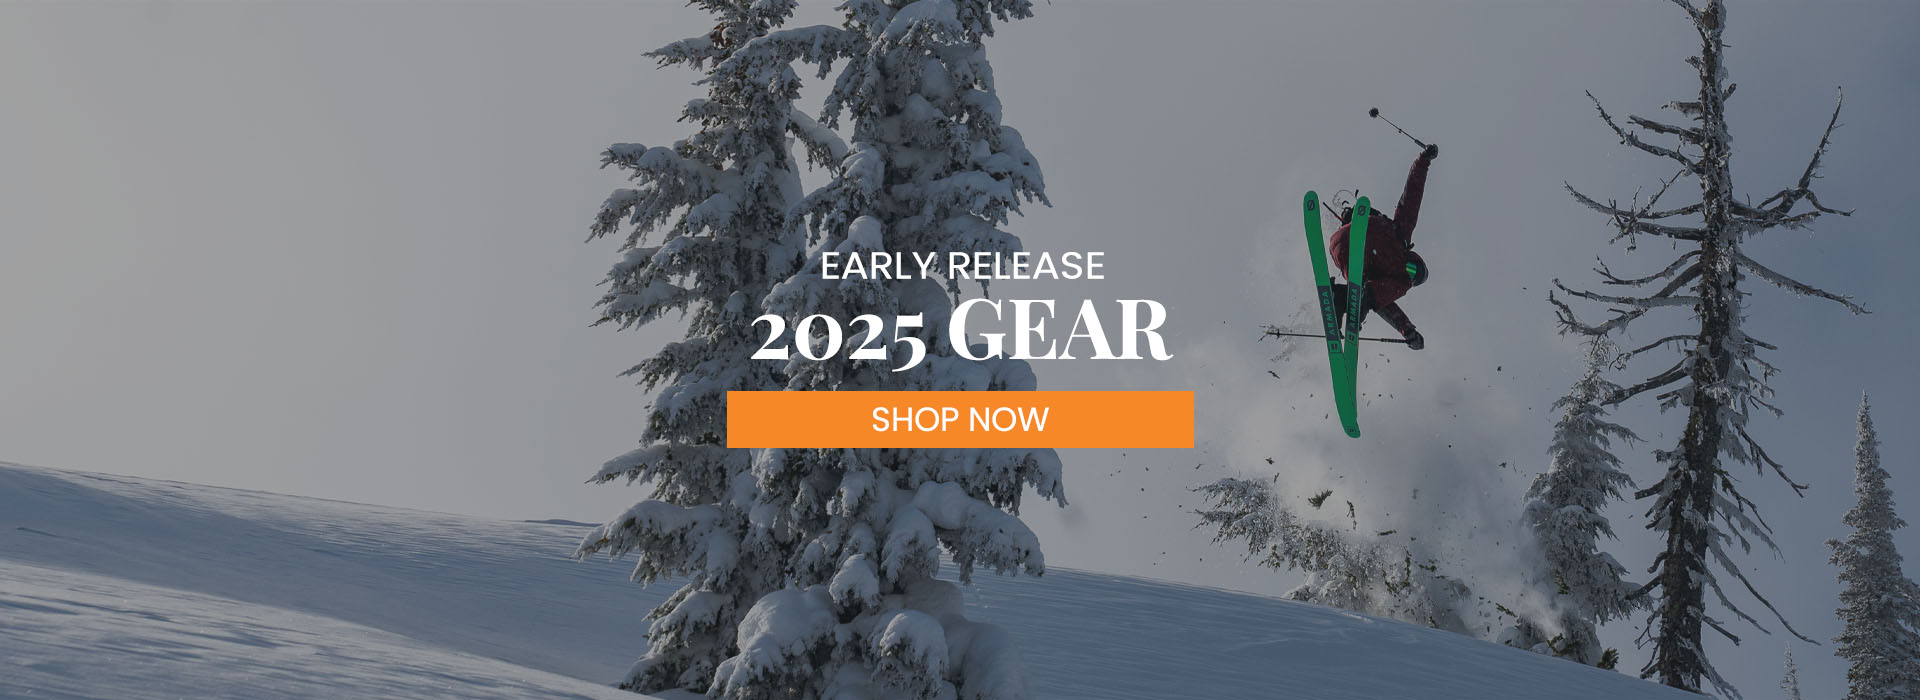 Early release 2025 gear is now available at BlueZone Sports!